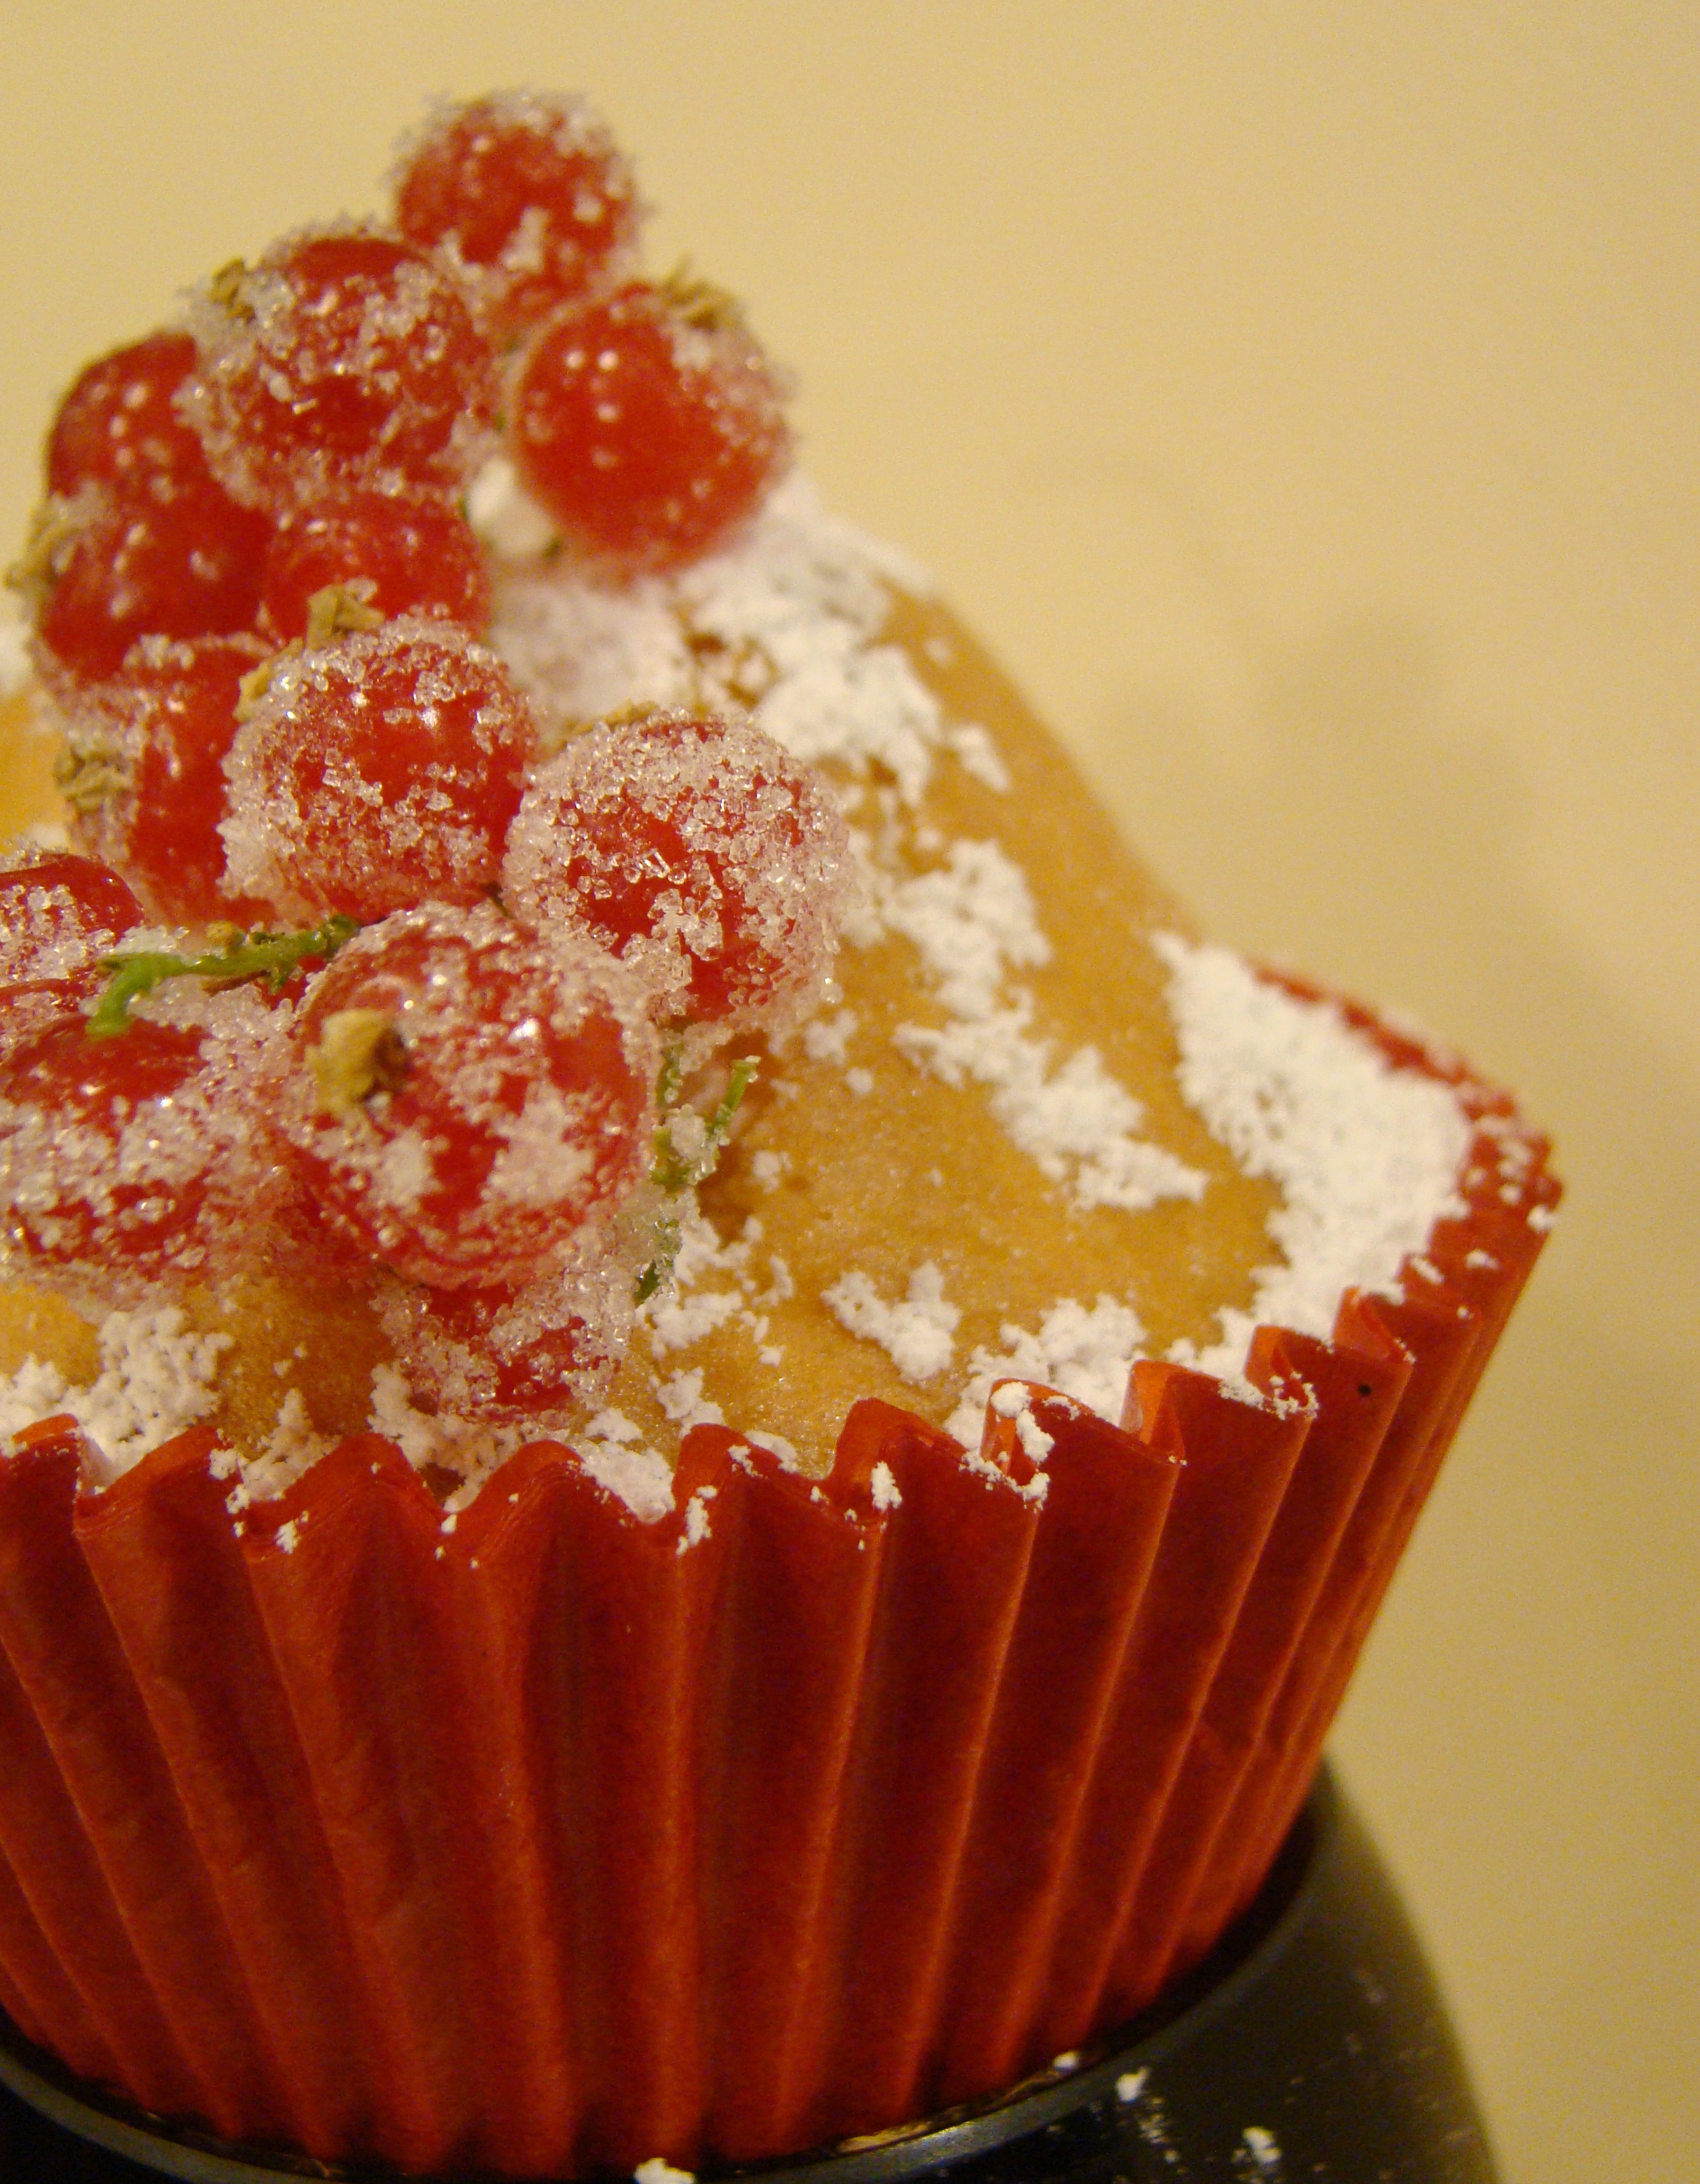 Lemon Thyme with Red Current Cupcake